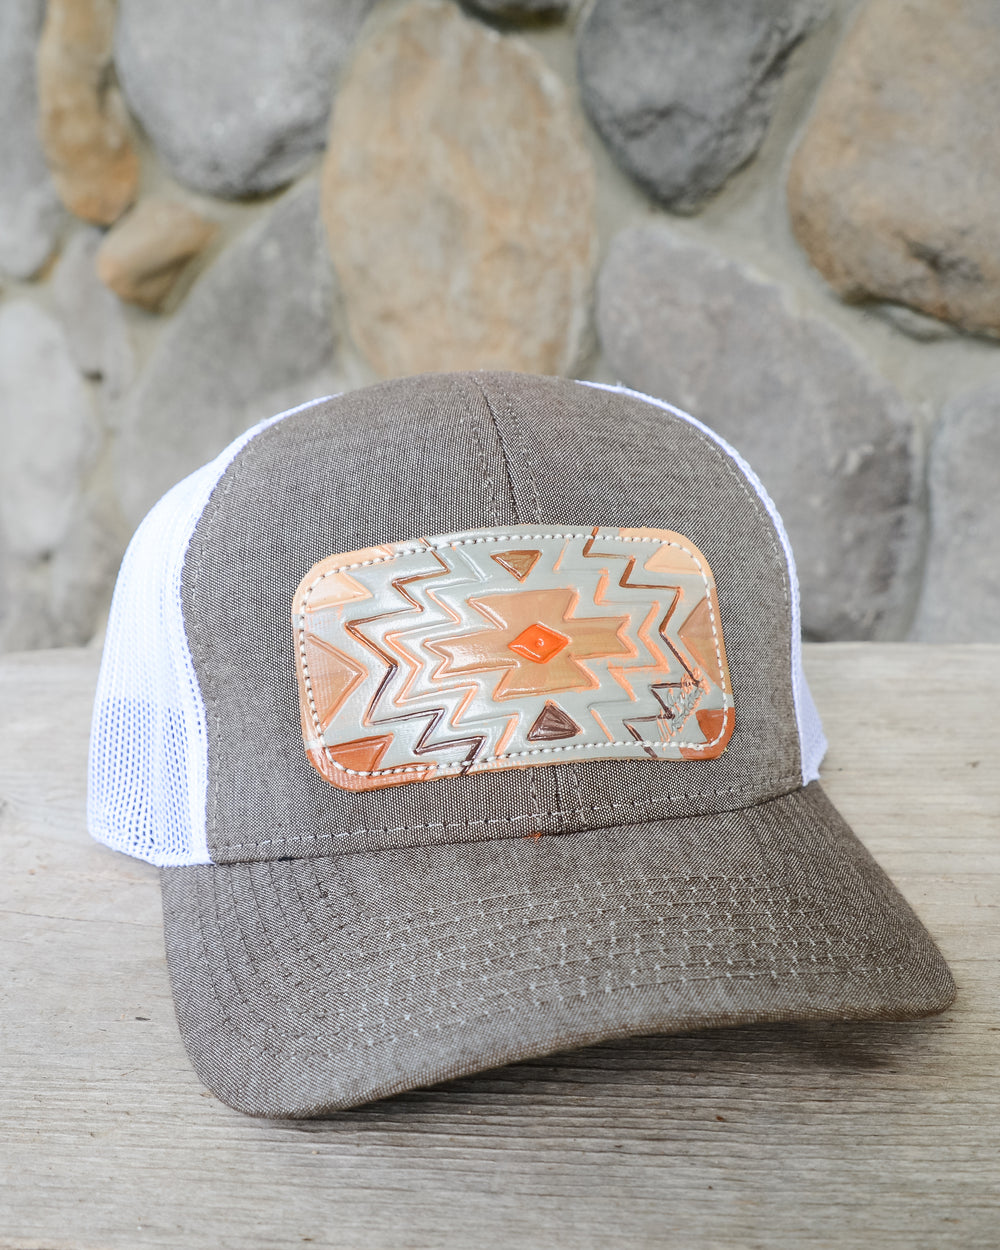 McIntire Saddlery Heather Brown and White Amarillo Aztec Leather Patch Cap